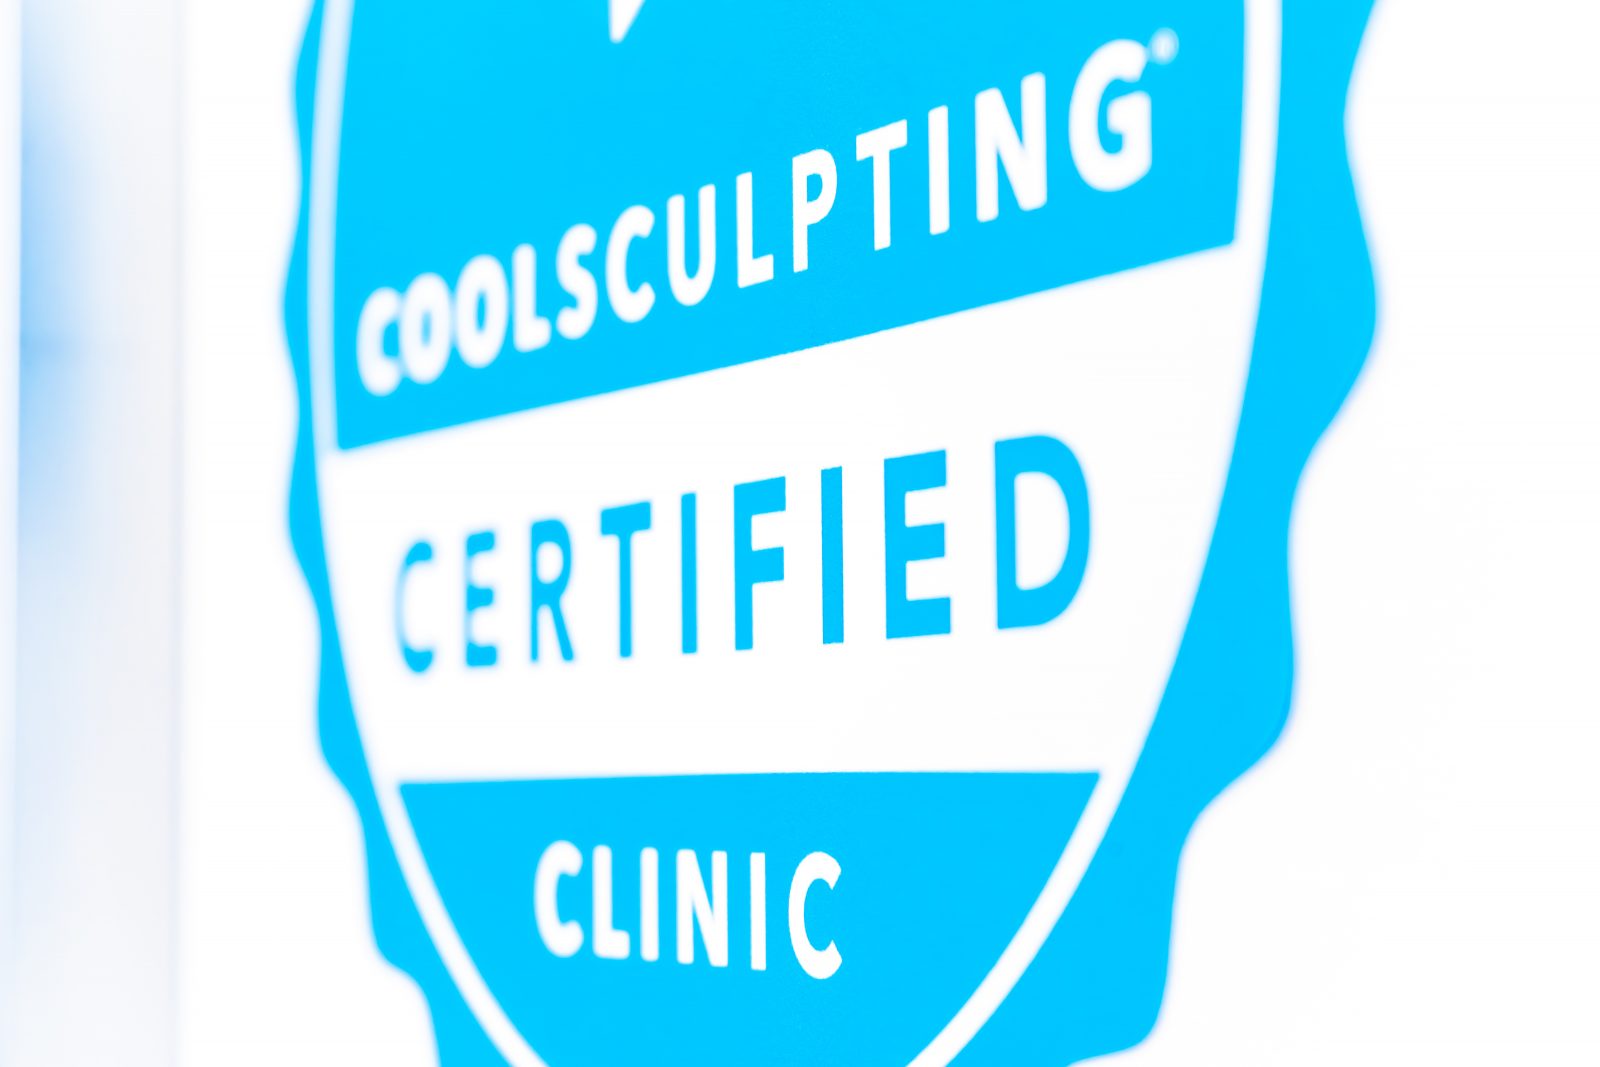 Coolsculpting certified badge decal displayed at a beauty laser clinic offering cryolipolysis cosmetic fat removal.